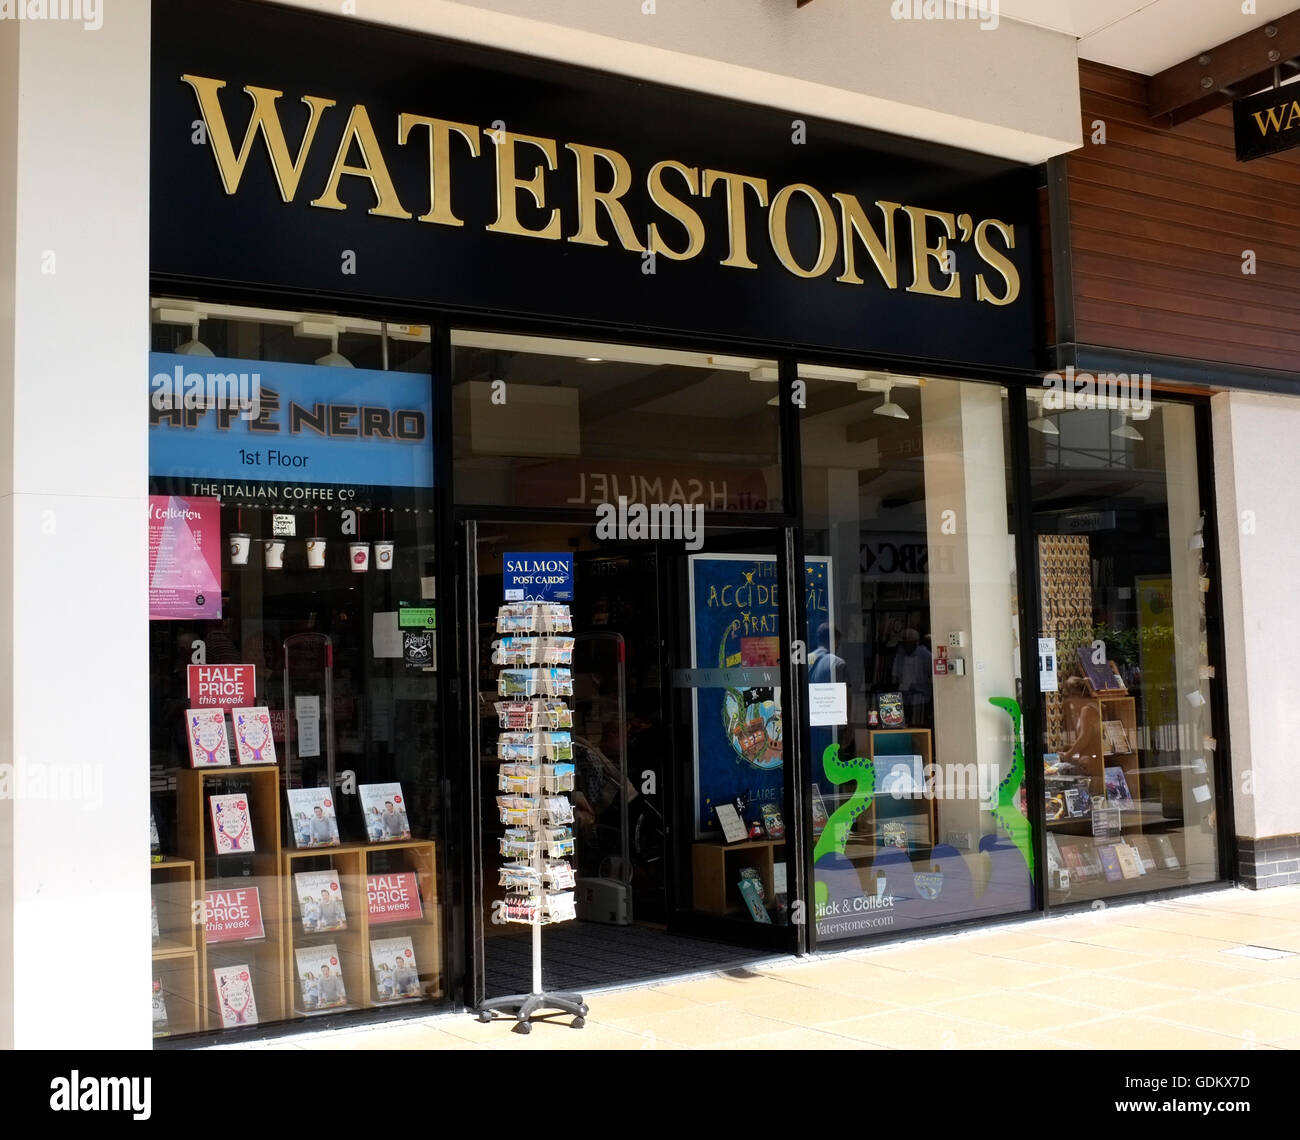 waterstones book shop seller branch in westwood cross shopping centre in east kent uk july 2016 Stock Photo